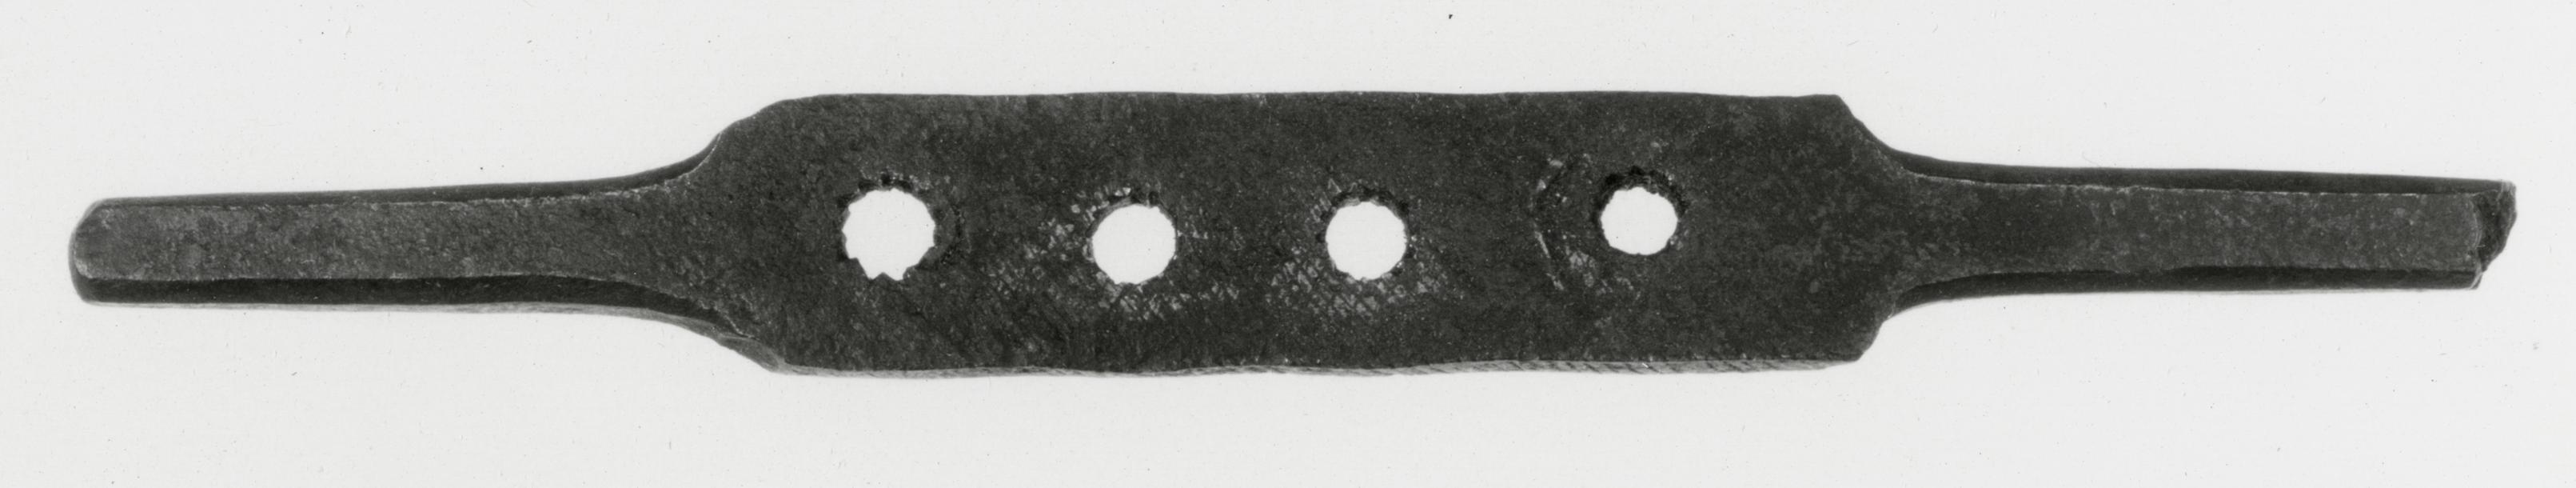 Black and white photograph of a pinion cutter.